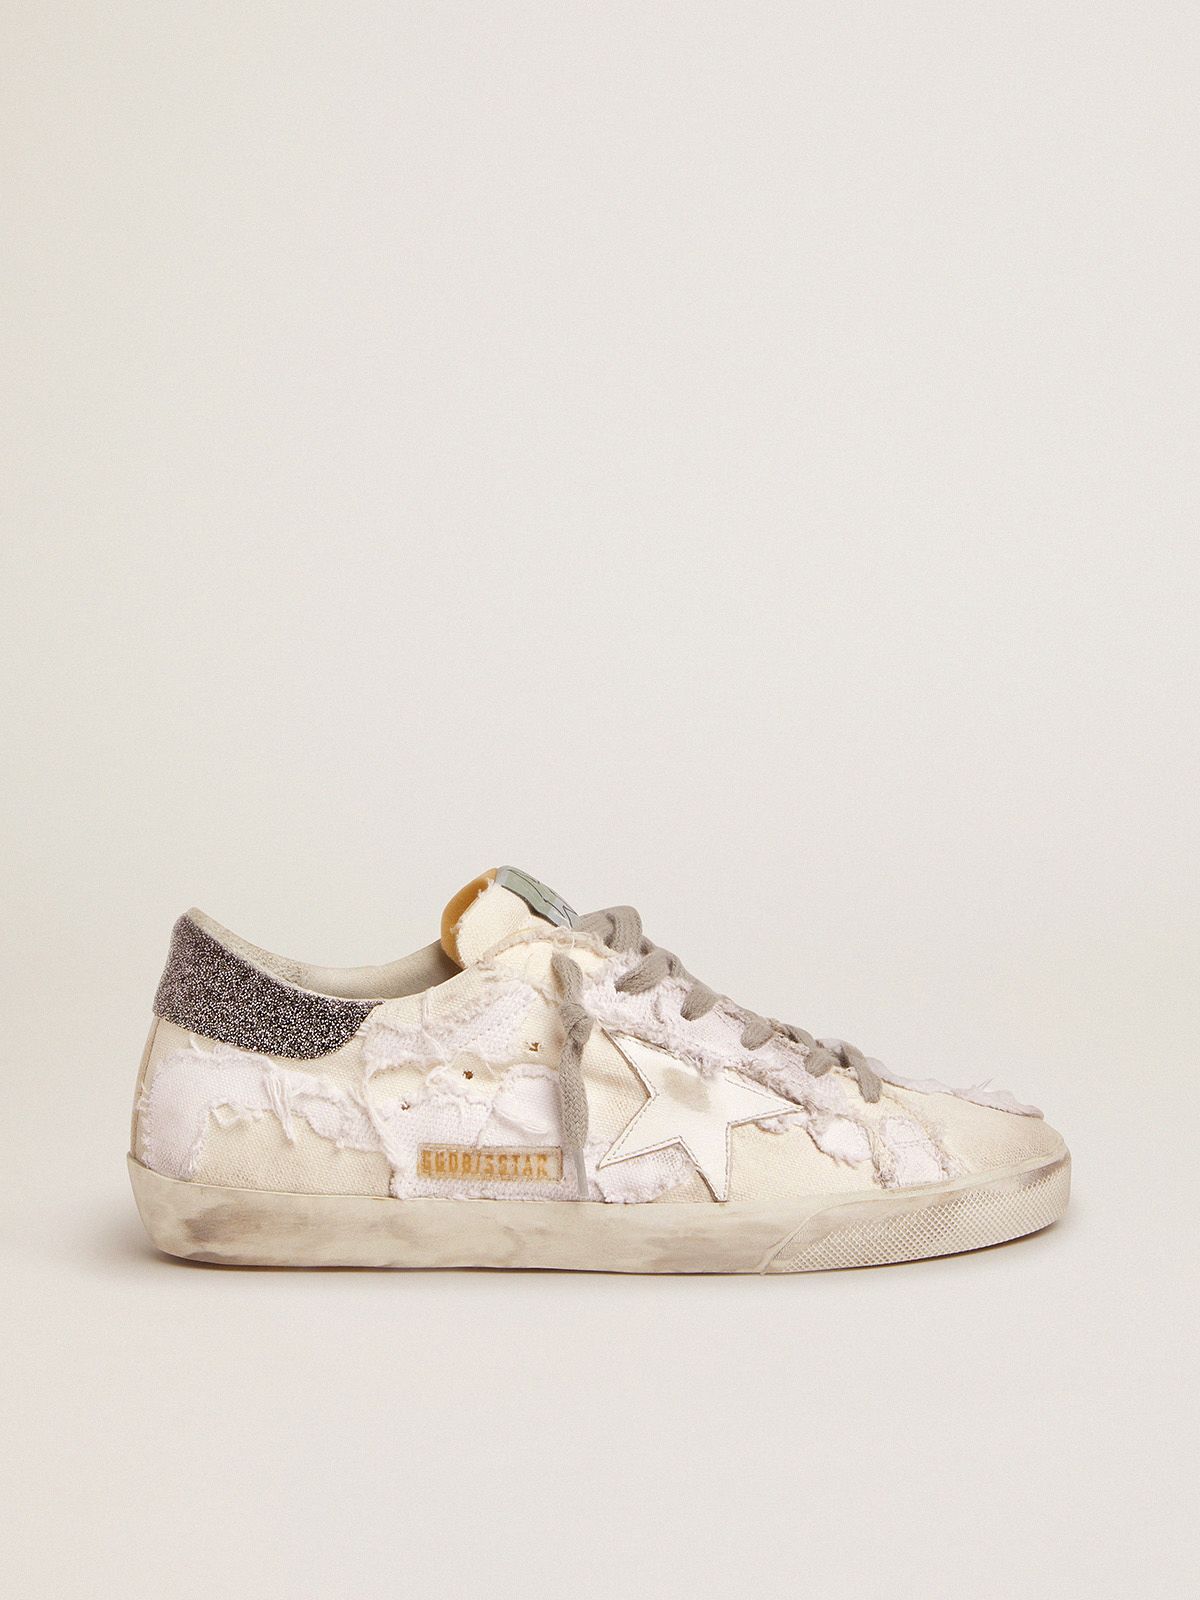 golden goose Super-Star crystal sneakers white black tab with in heel Swarovski canvas